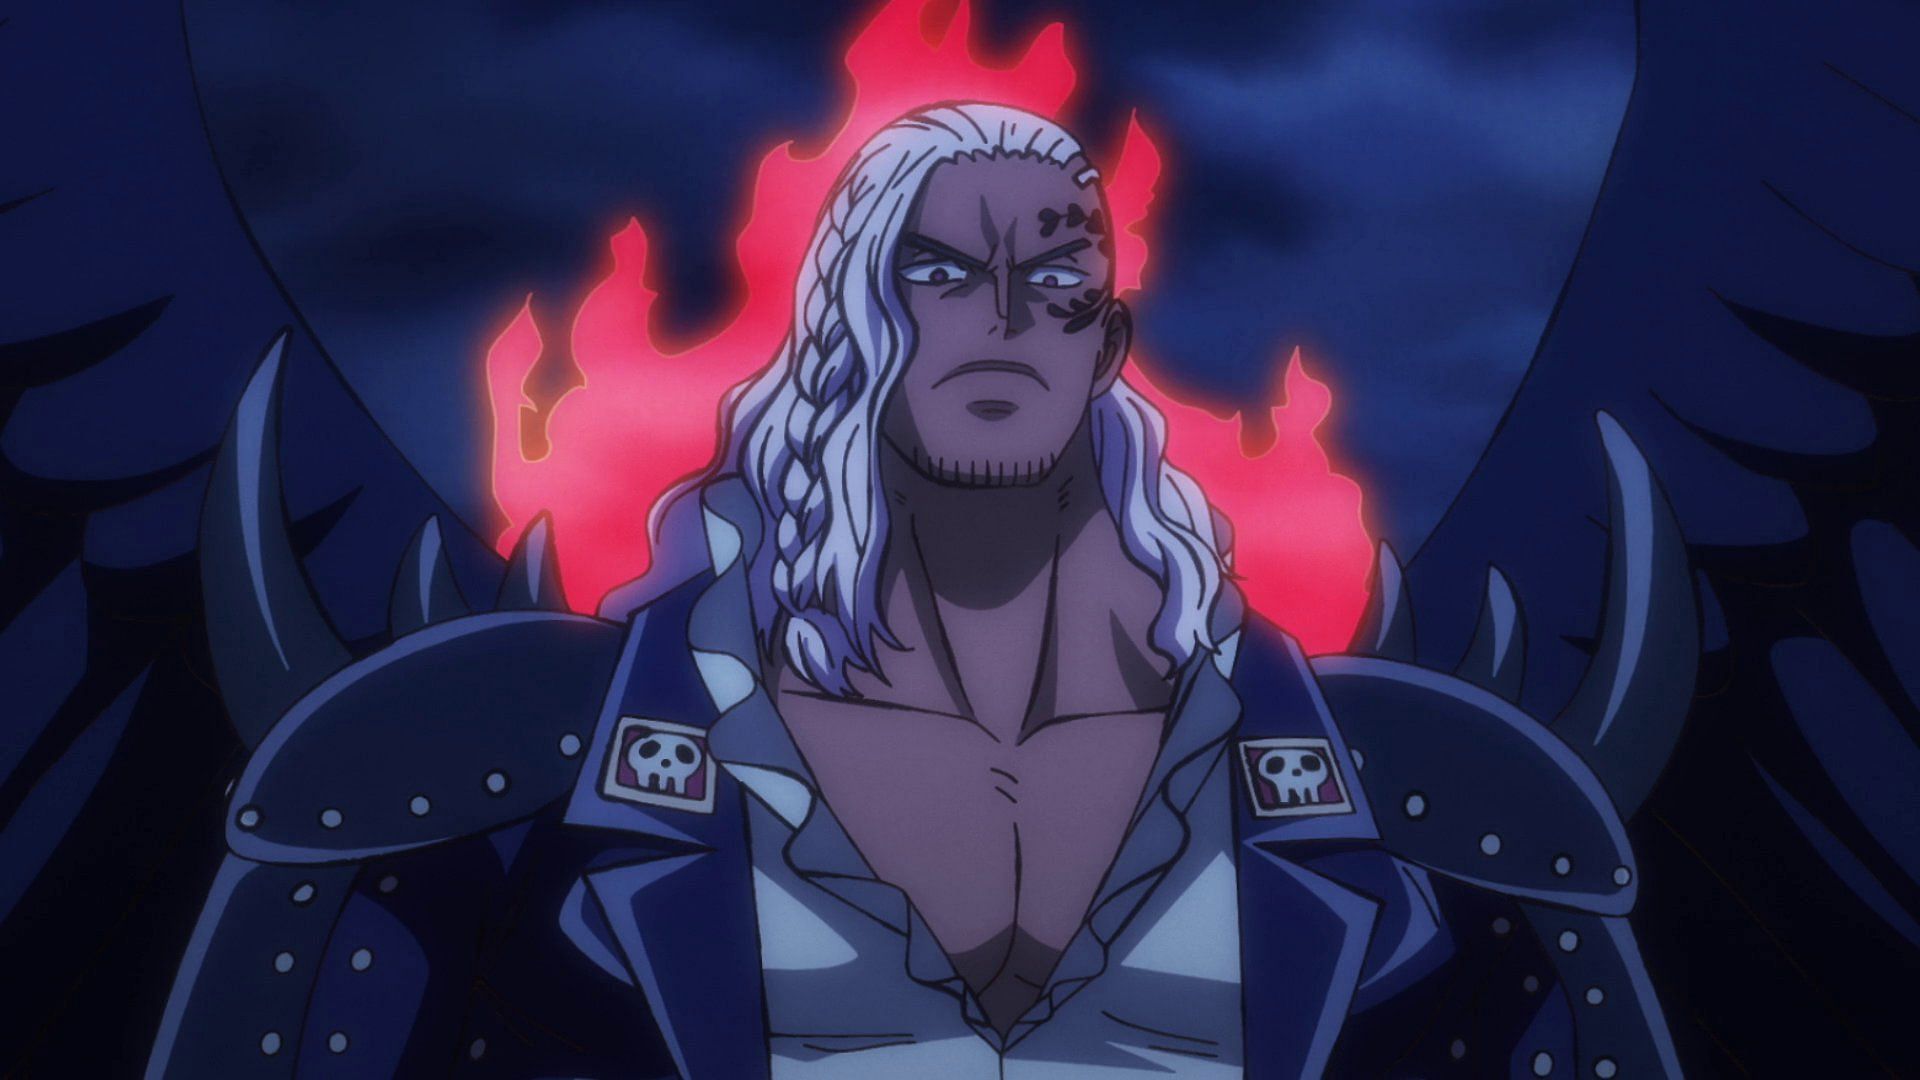 King as seen during the fight against Zoro (Image via Toei Animation, One Piece)